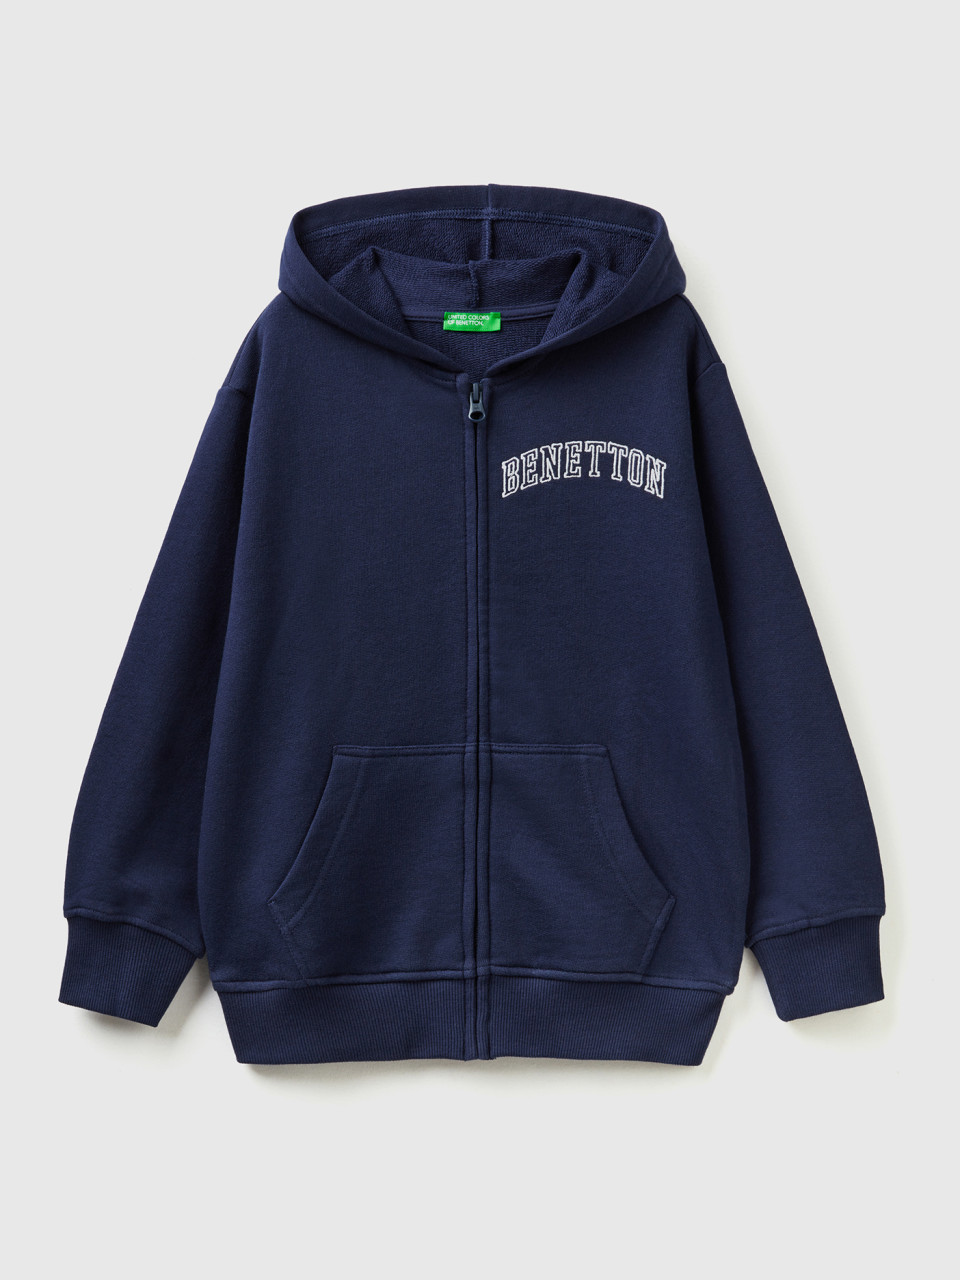 Benetton, Hoodie With Zip And Embroidered Logo, Dark Blue, Kids